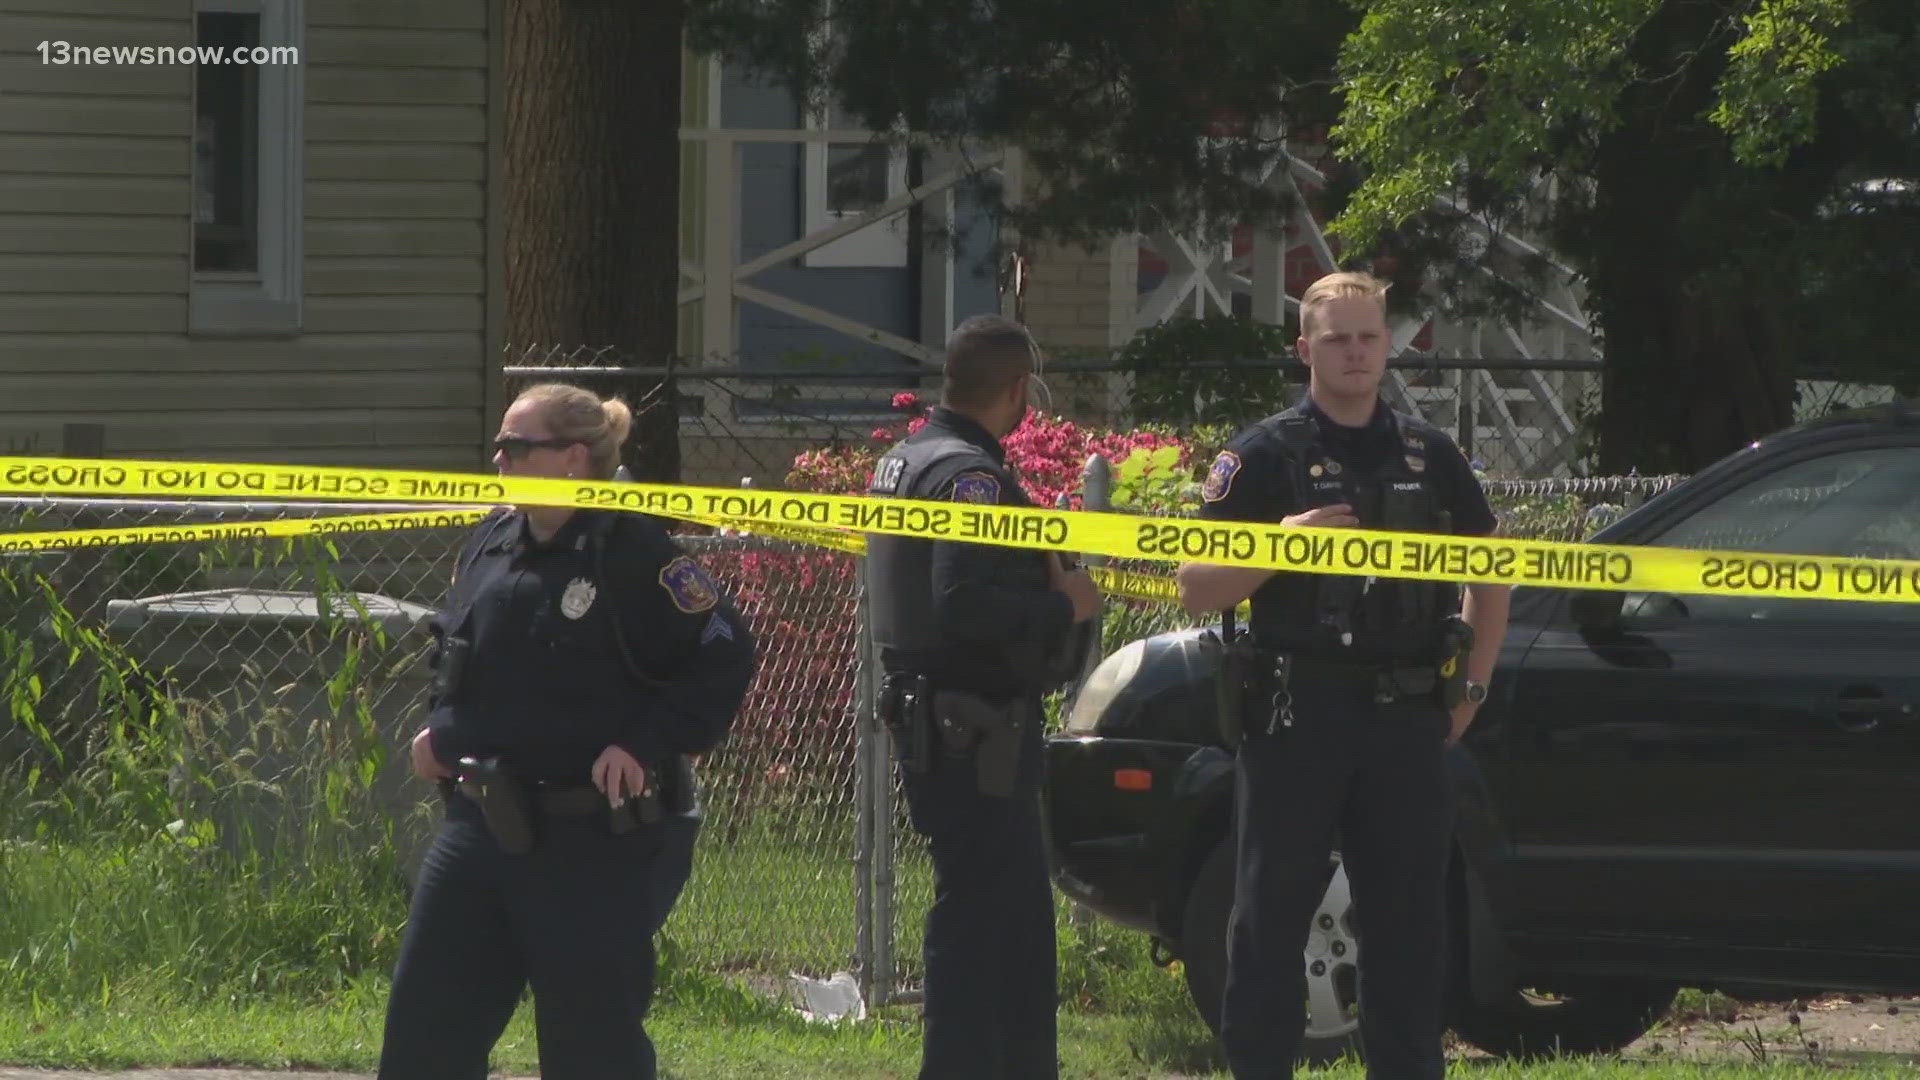 Investigators say someone shot and killed a 38-year-old man Sunday afternoon.